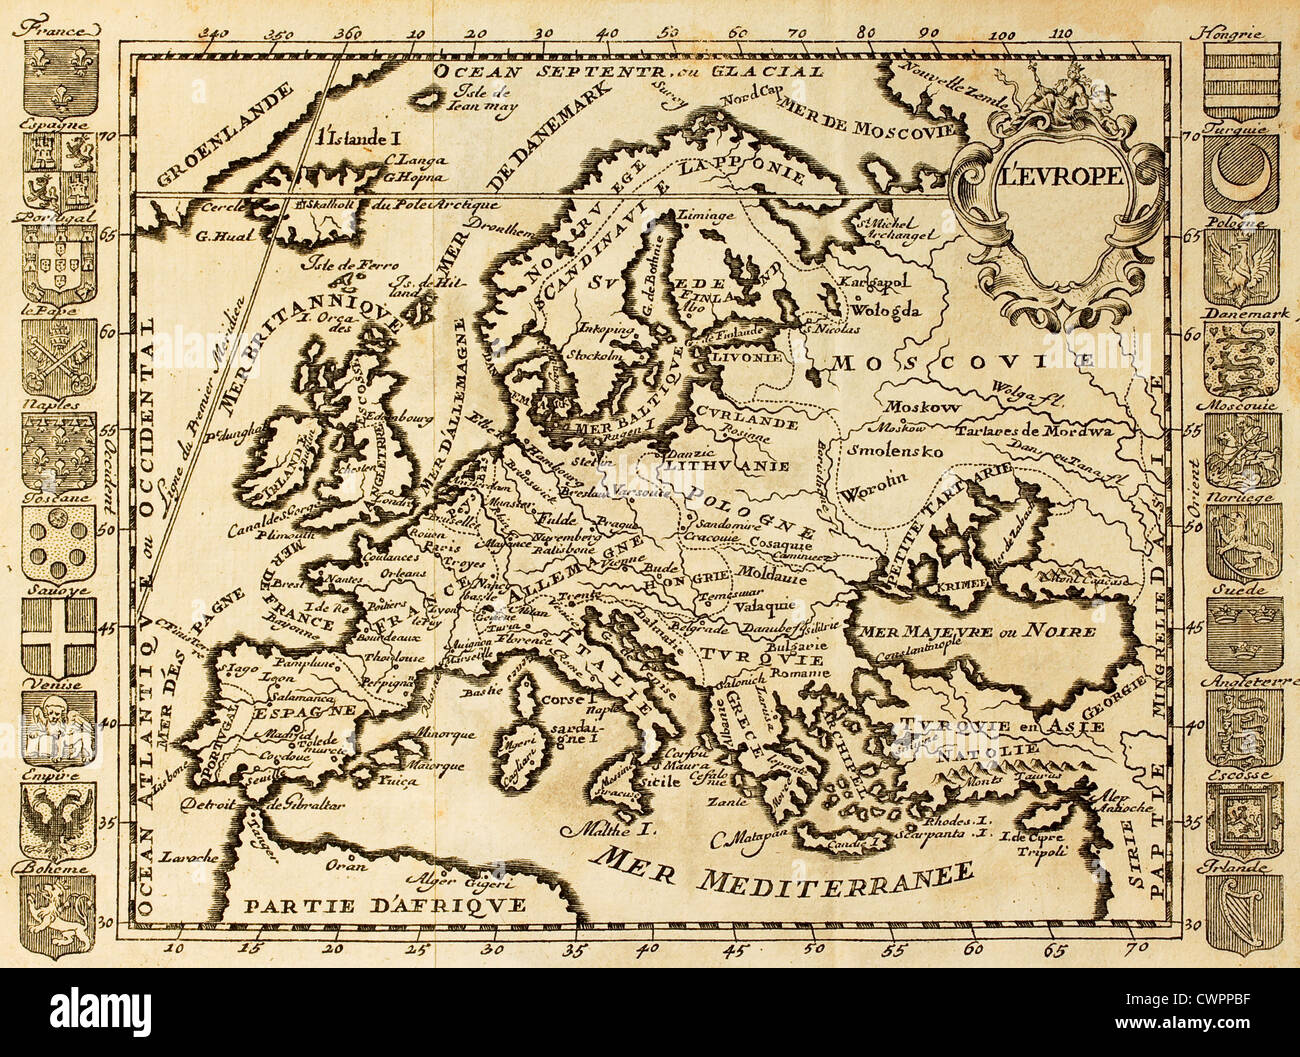 Map of Europe framed by national crests. May be datet to the beginning of XVIII sec. Stock Photo